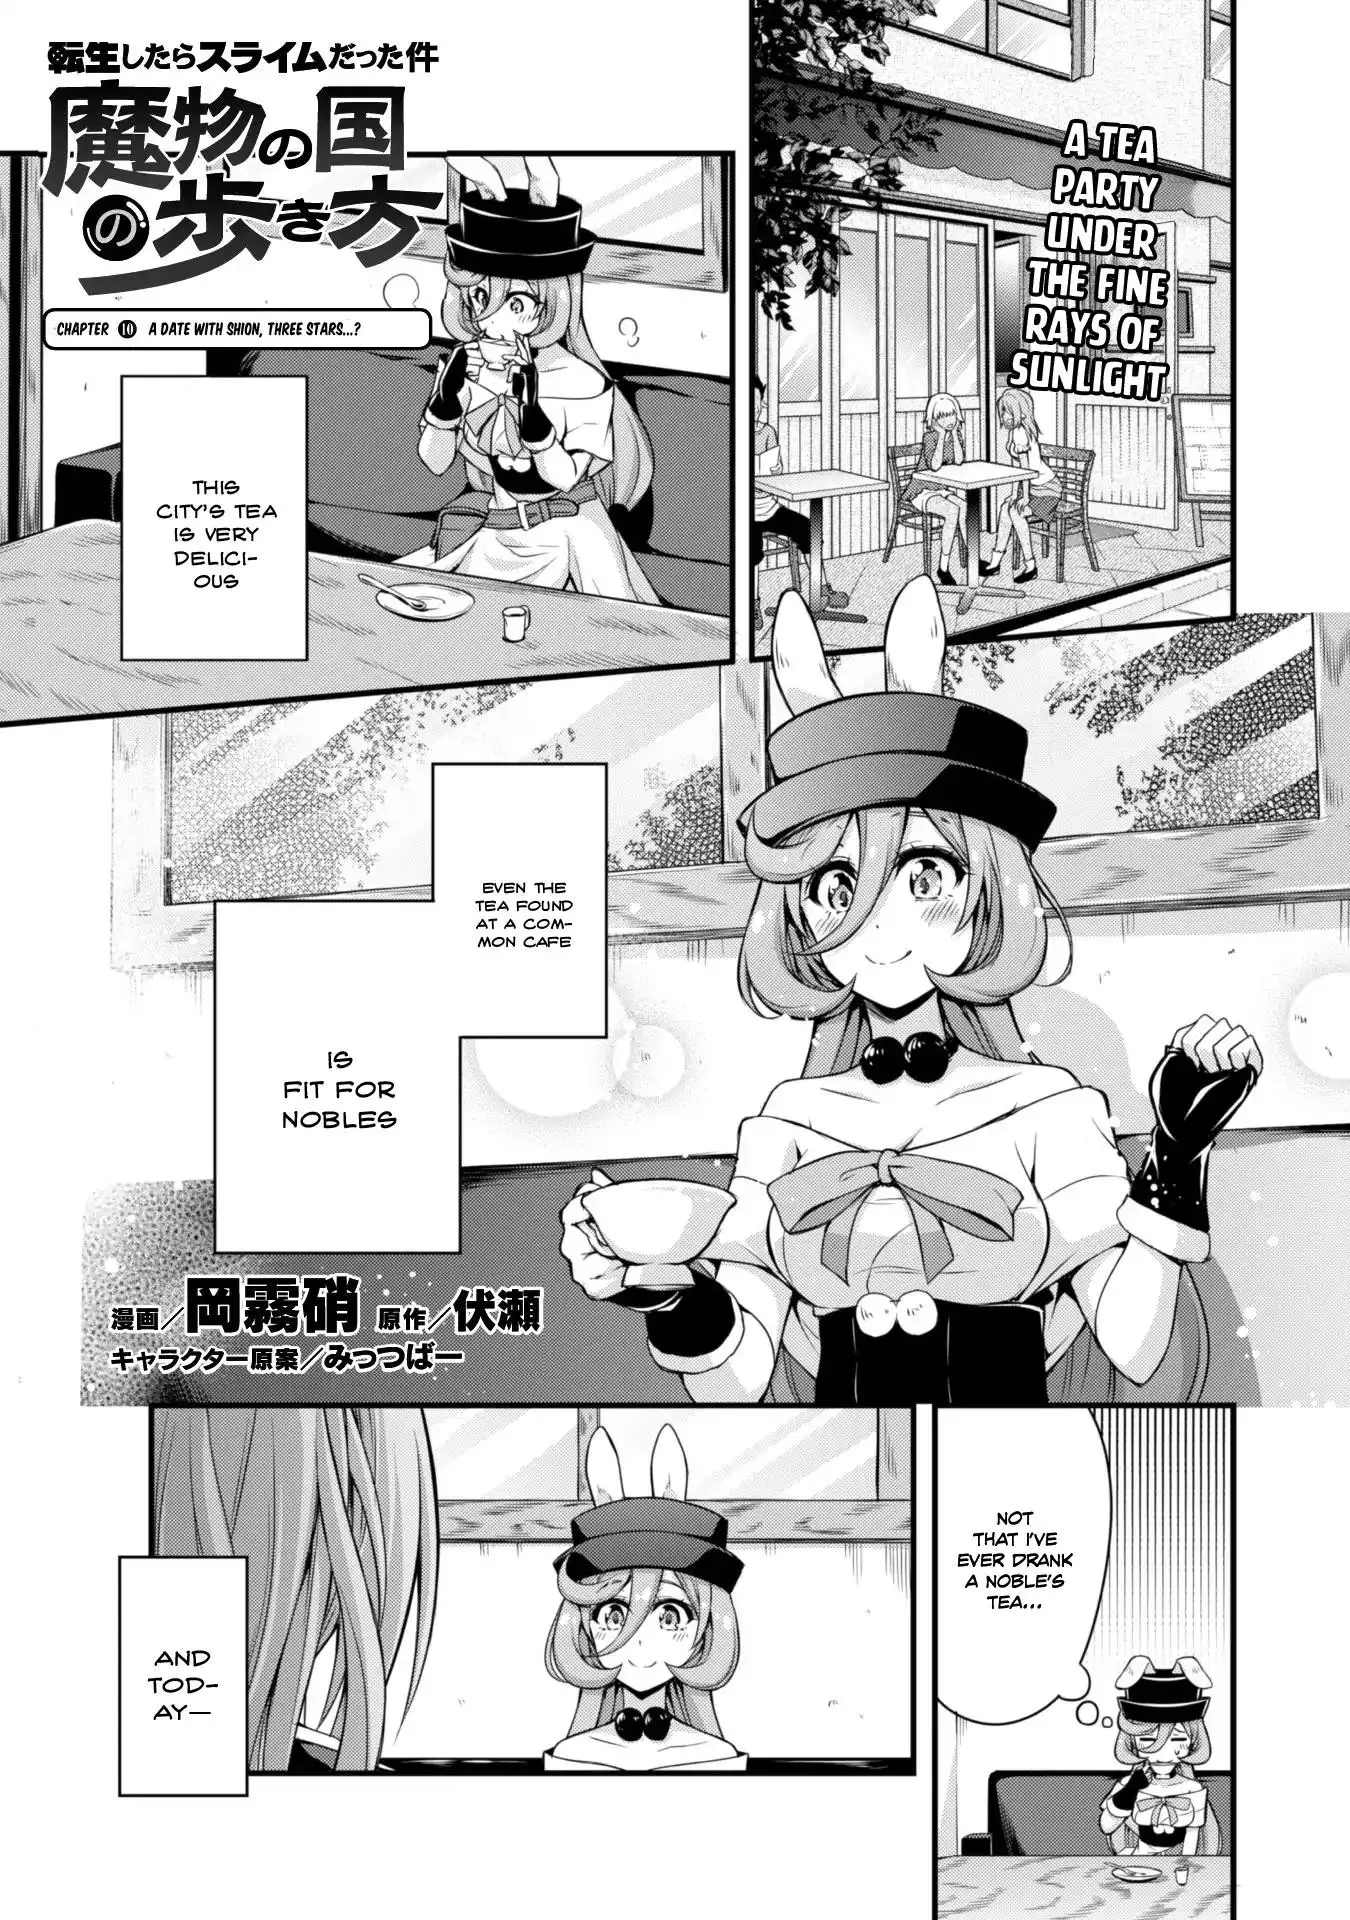 Tensei Shitara Slime Datta Ken: The Ways of Strolling in the Demon Country - 10 page 2